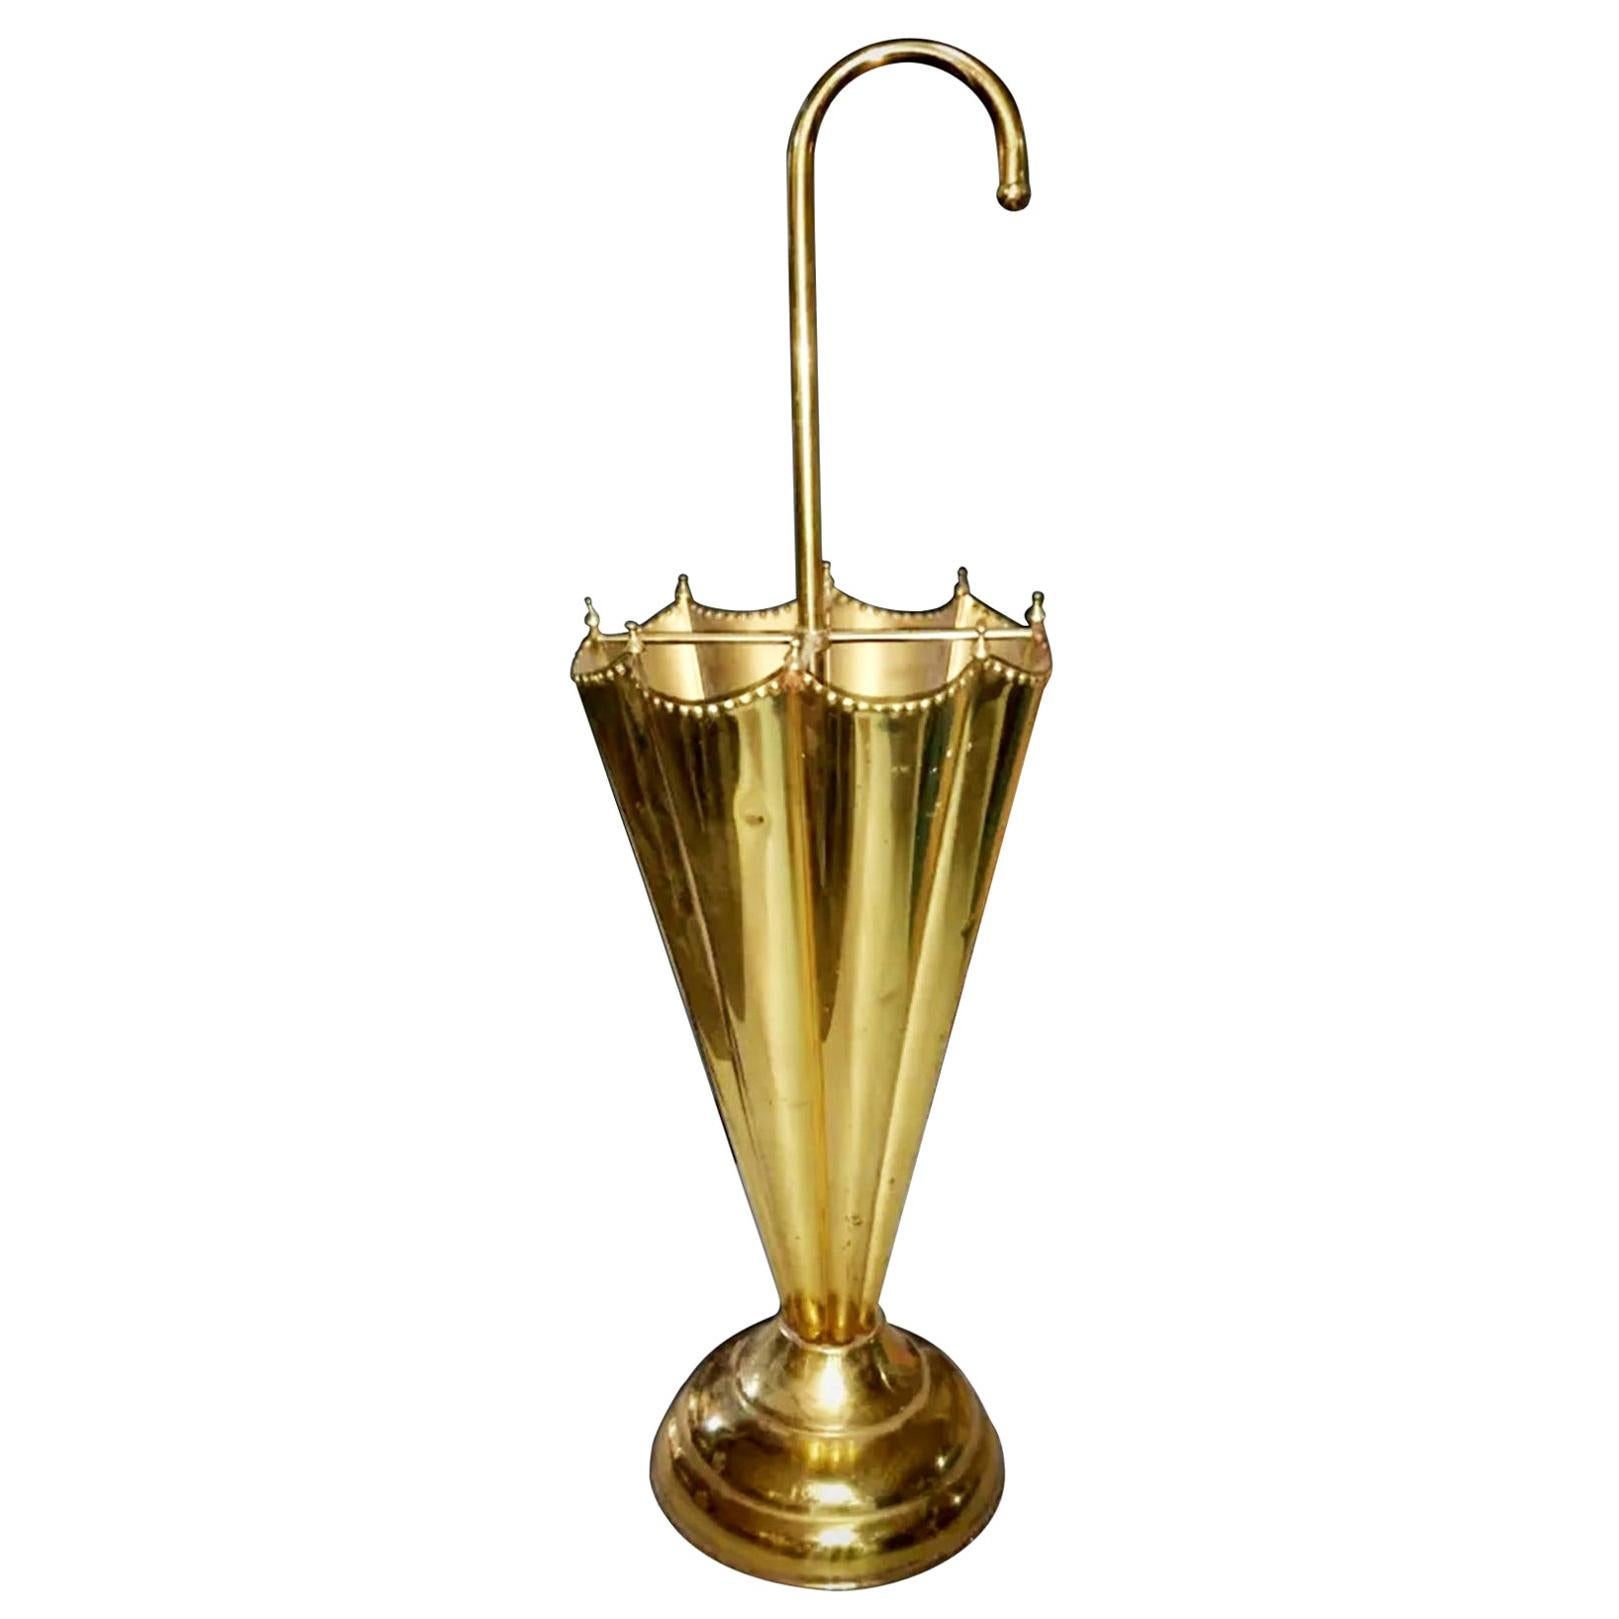 Midcentury Vintage Umbrella Stand Brass in the Form of an Umbrella, Italy, 1950s